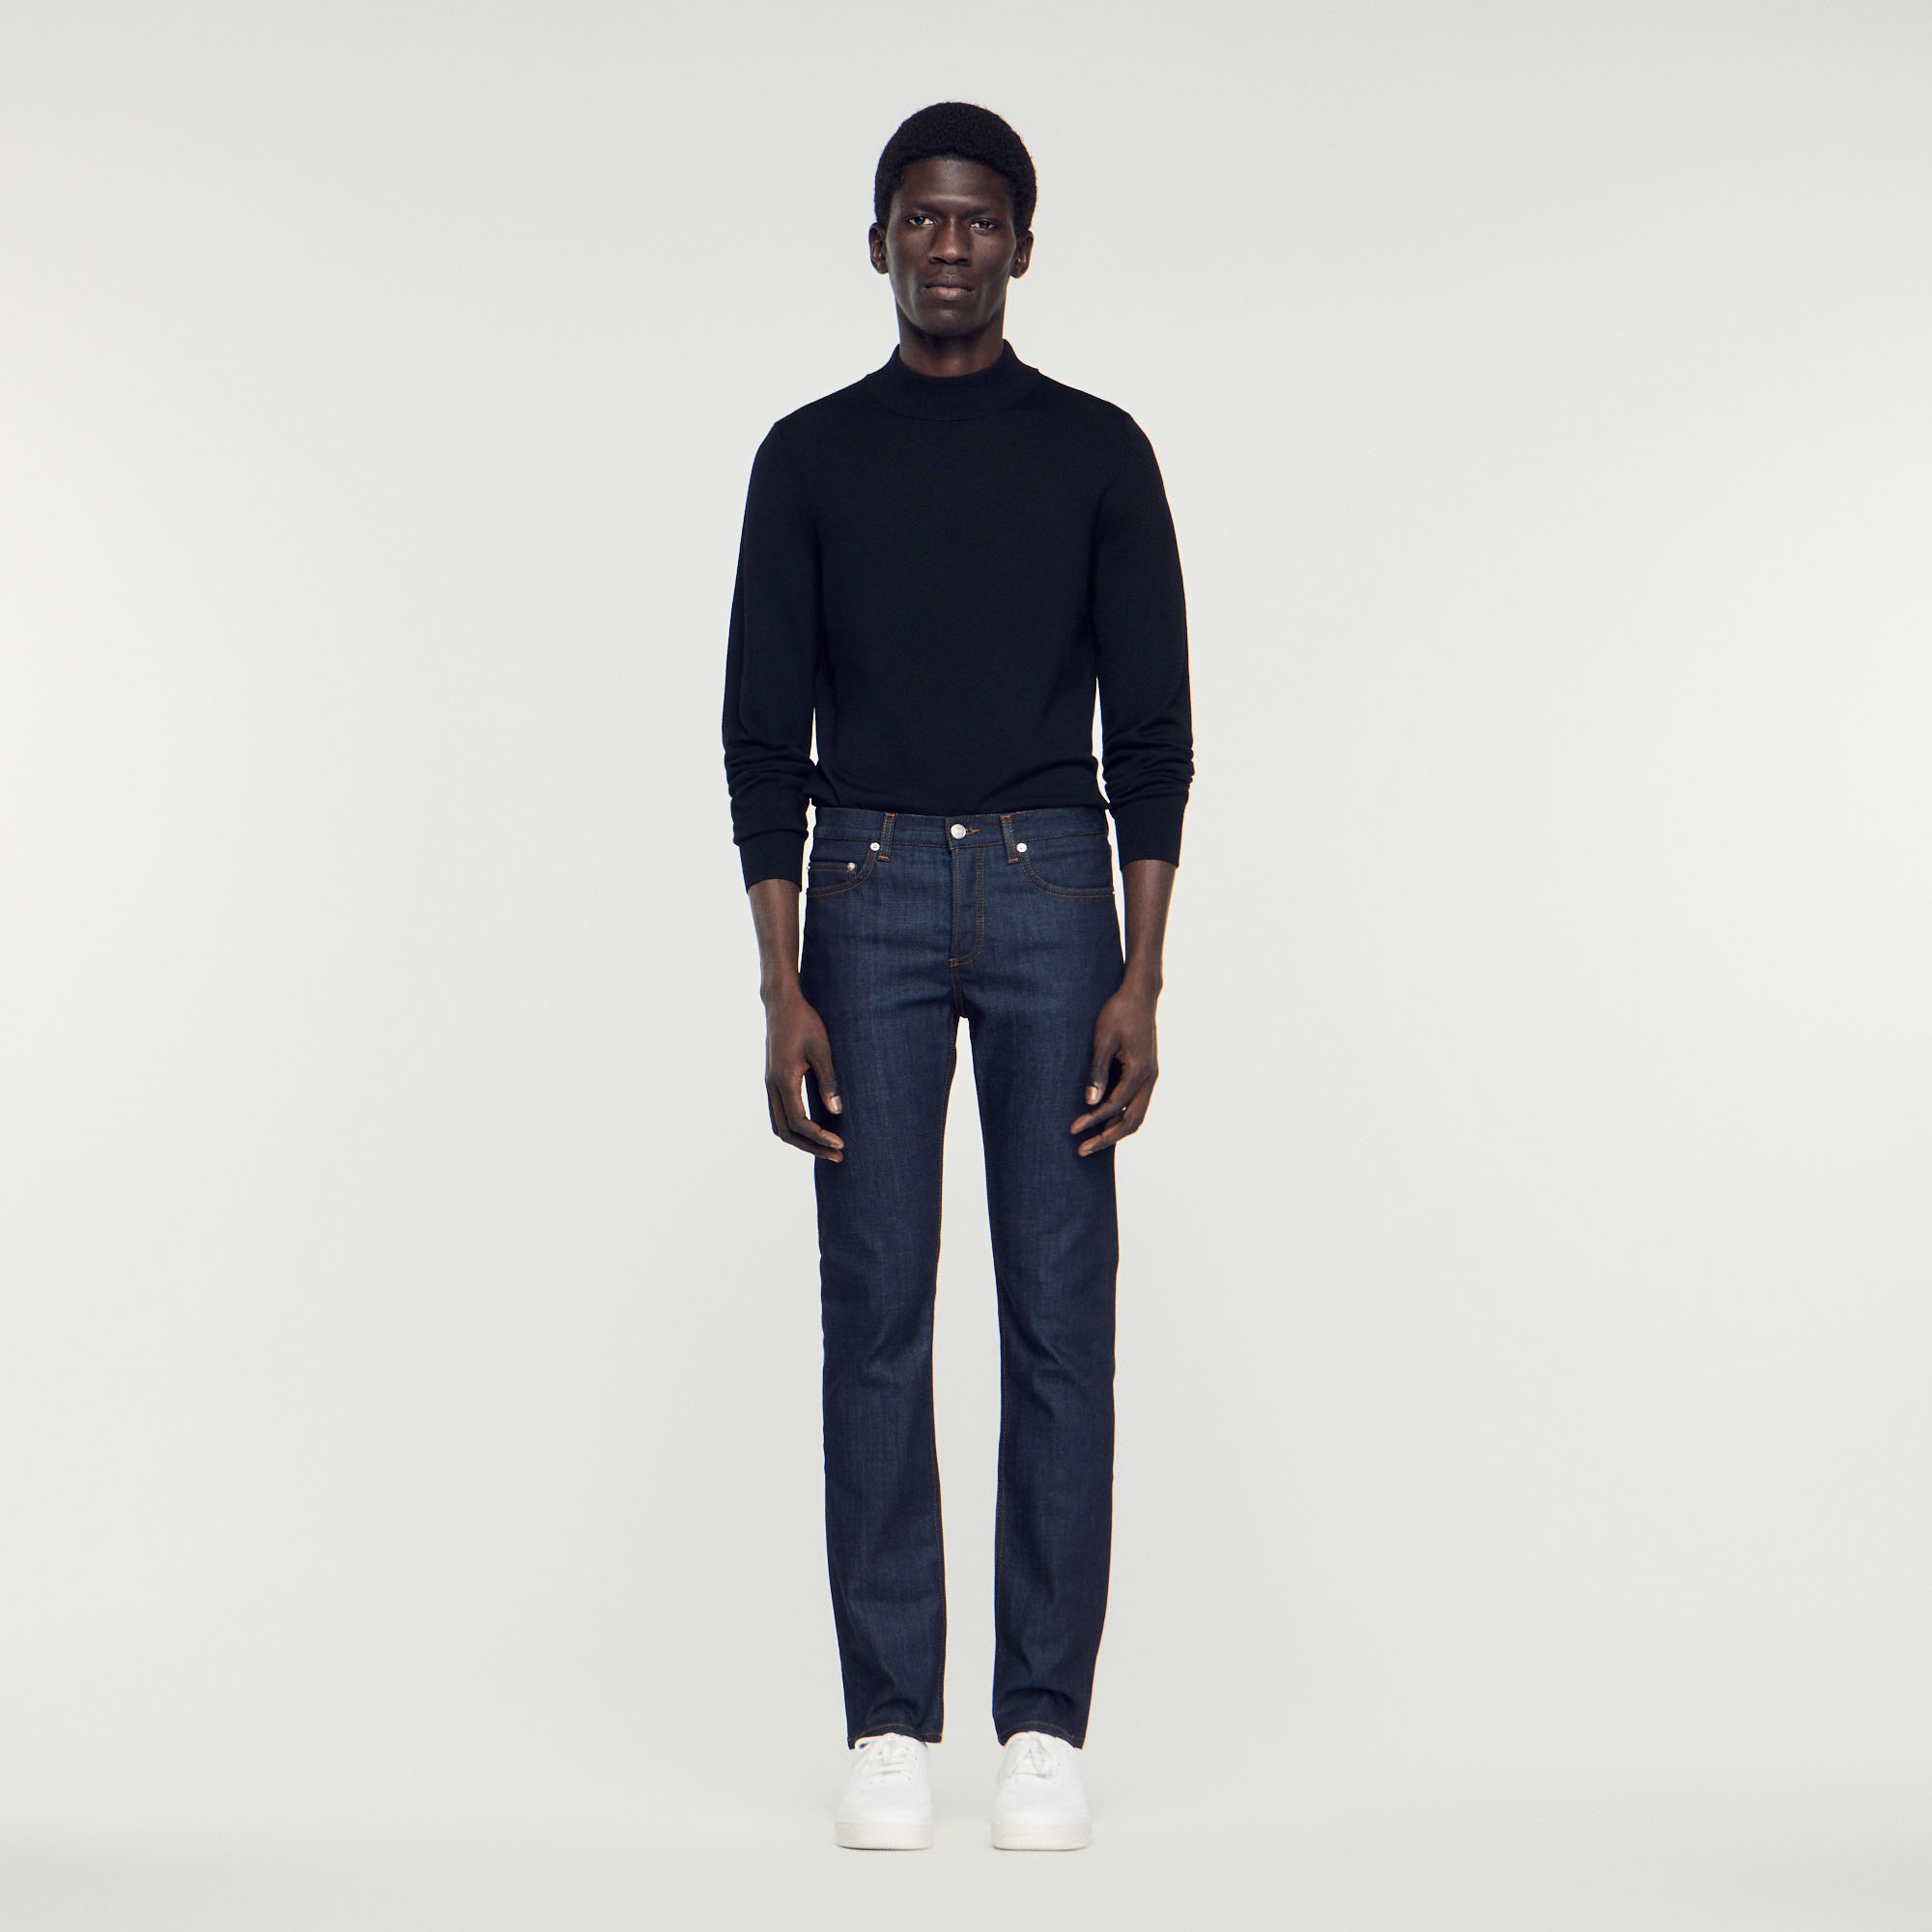 Sandro cotton Sandro raw jeans â€¢ Narrow cut (hem width: 17 cm) â€¢ Cotton â€¢ Five pockets â€¢ Classic waist â€¢ Button fastening under placket â€¢ Contrasting topstitching â€¢ Model is wearing a size 3 The cotton in this item was produced organically via a cultivation method that preserves biodiversity and bans the use of pesticides and GMOs